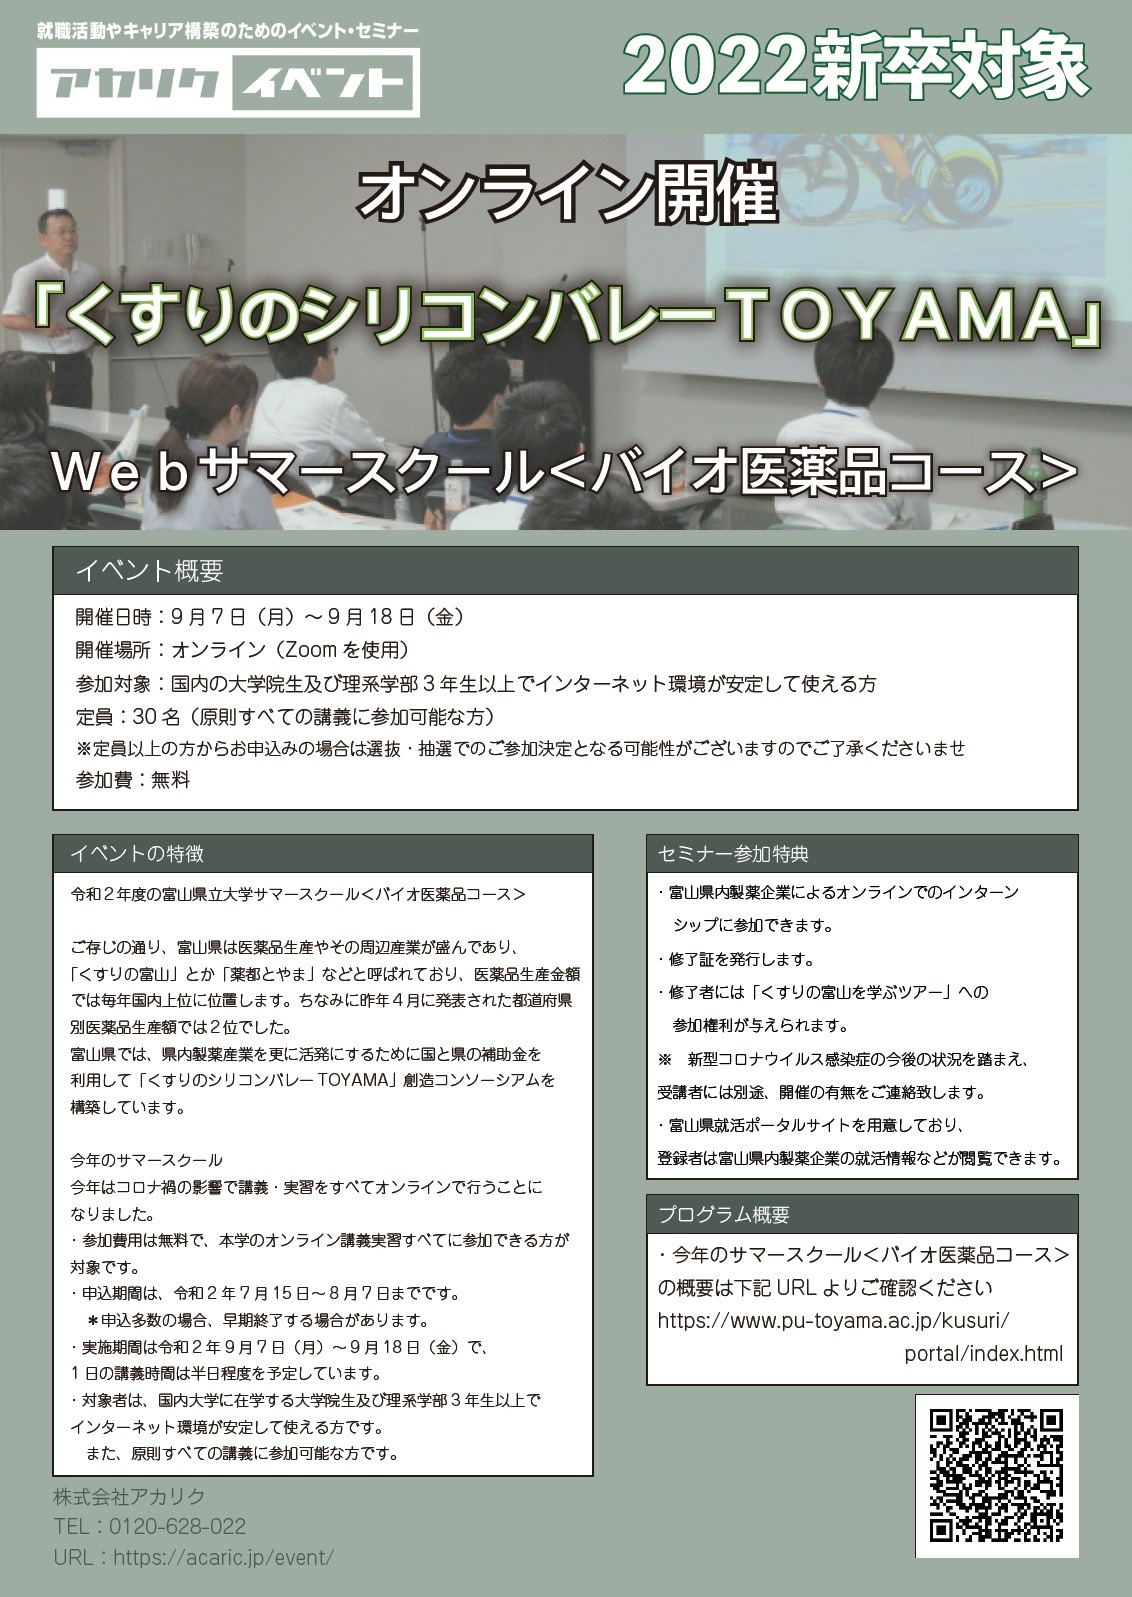 Information Board Acaric Jp Event Pages 09toyama Intern